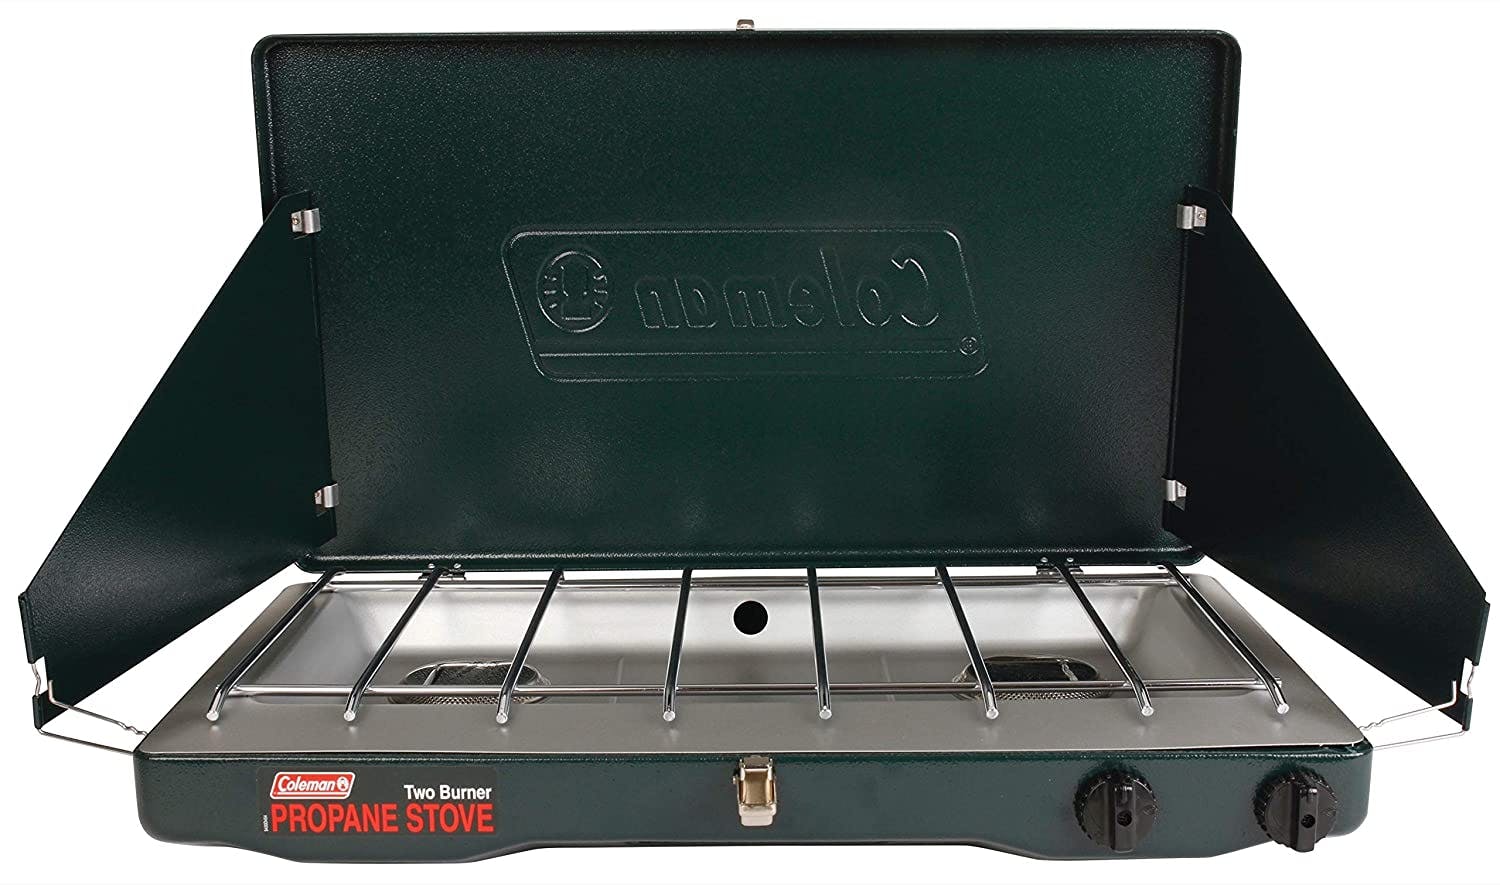 Product image of the Coleman Classic Propane Stove.